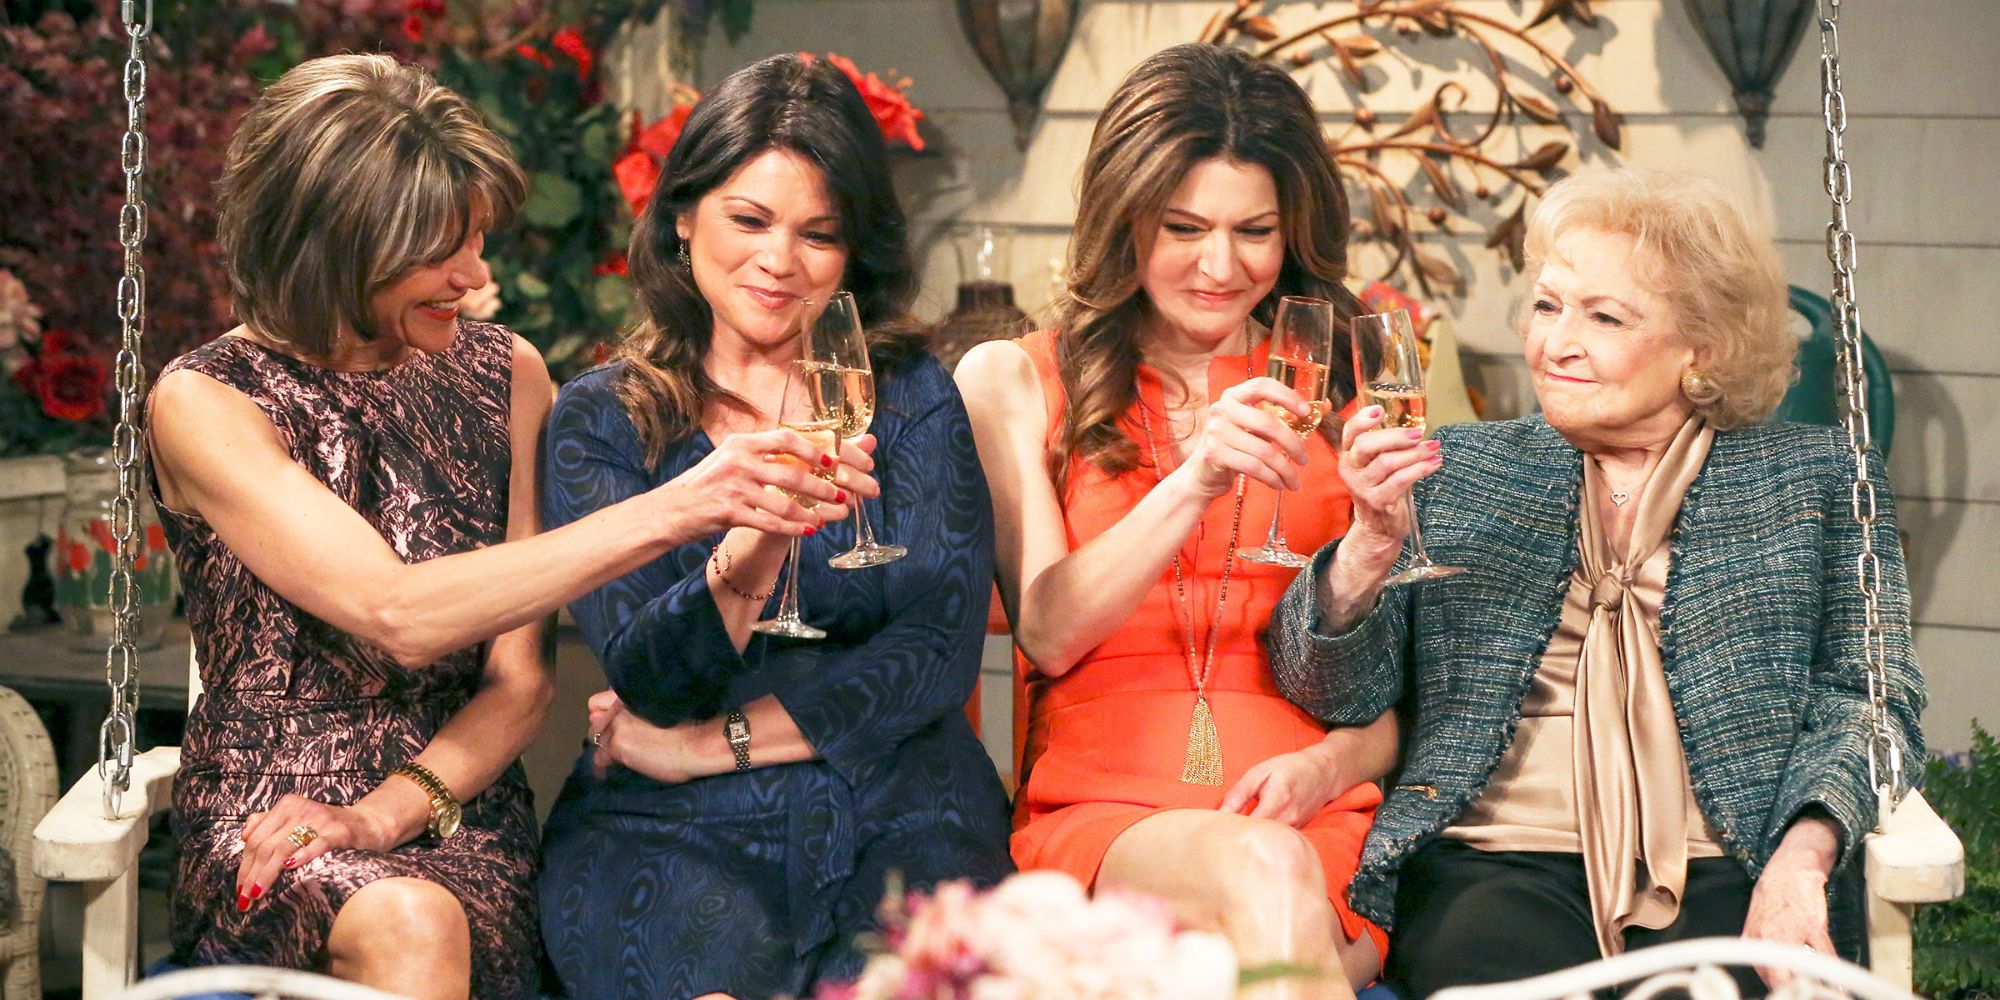 The cast of Hot In Cleveland toasting on a porch swing